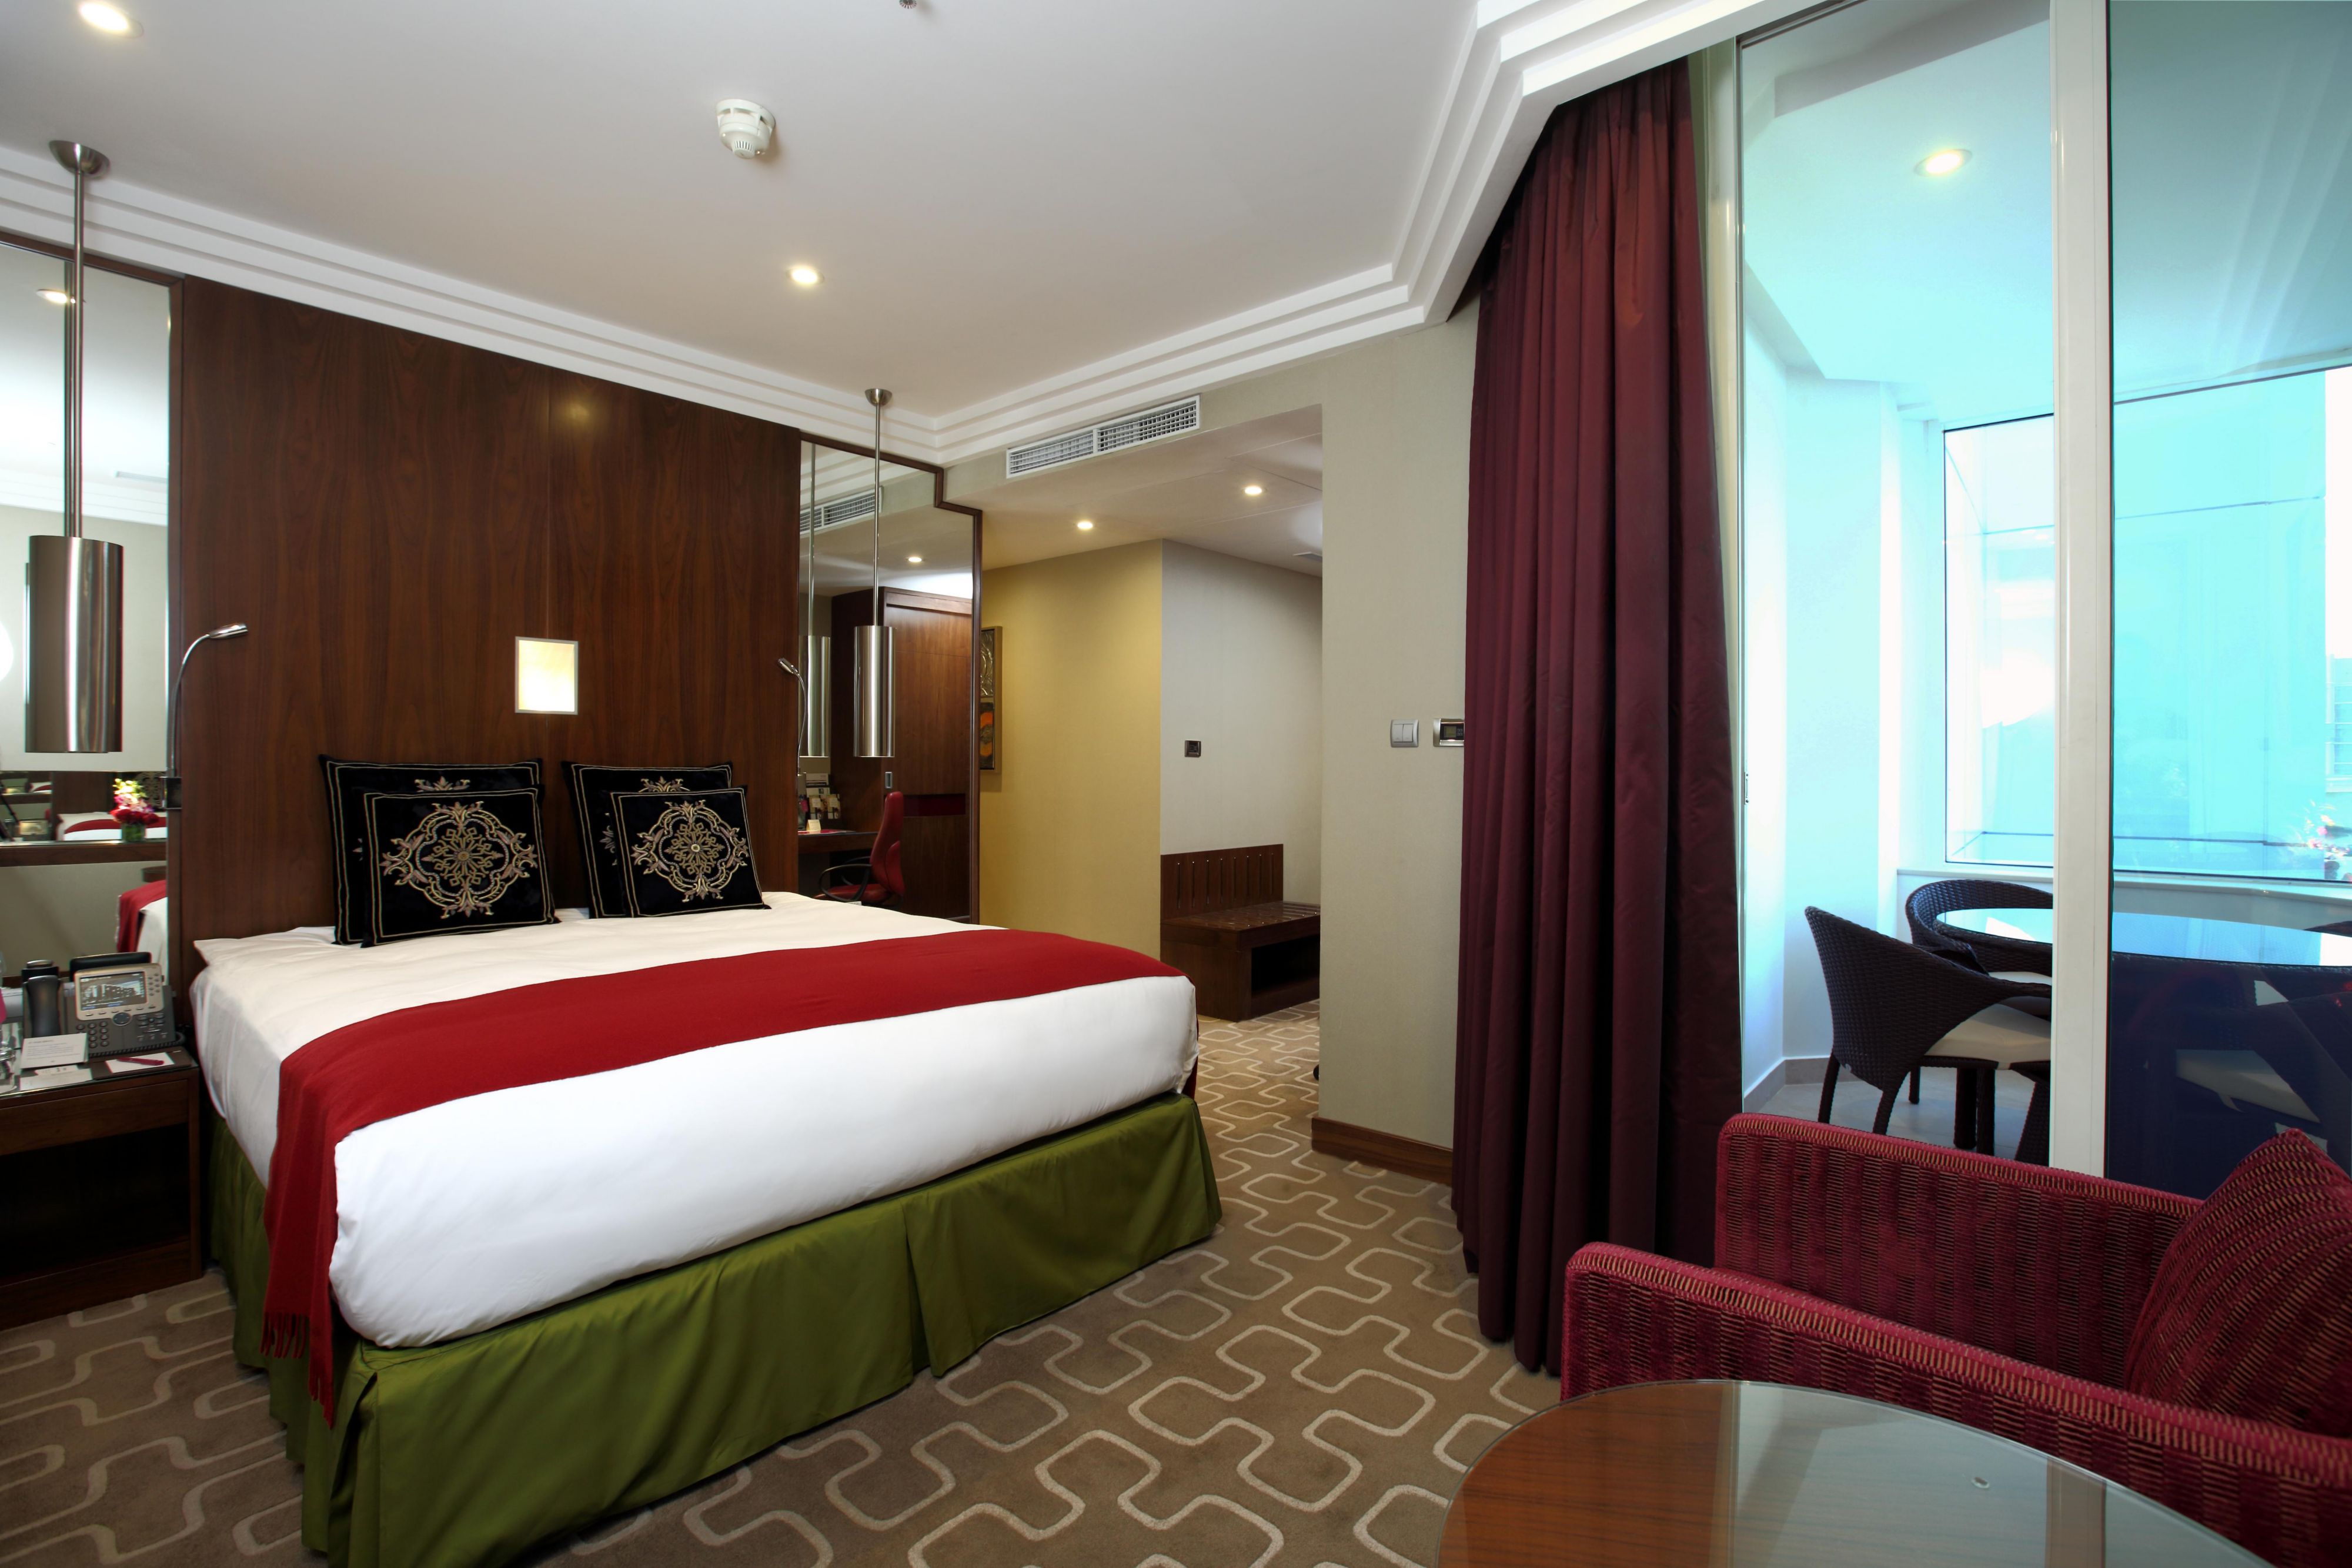 Spacious bedroom with balcony access in the Ambassador Suite